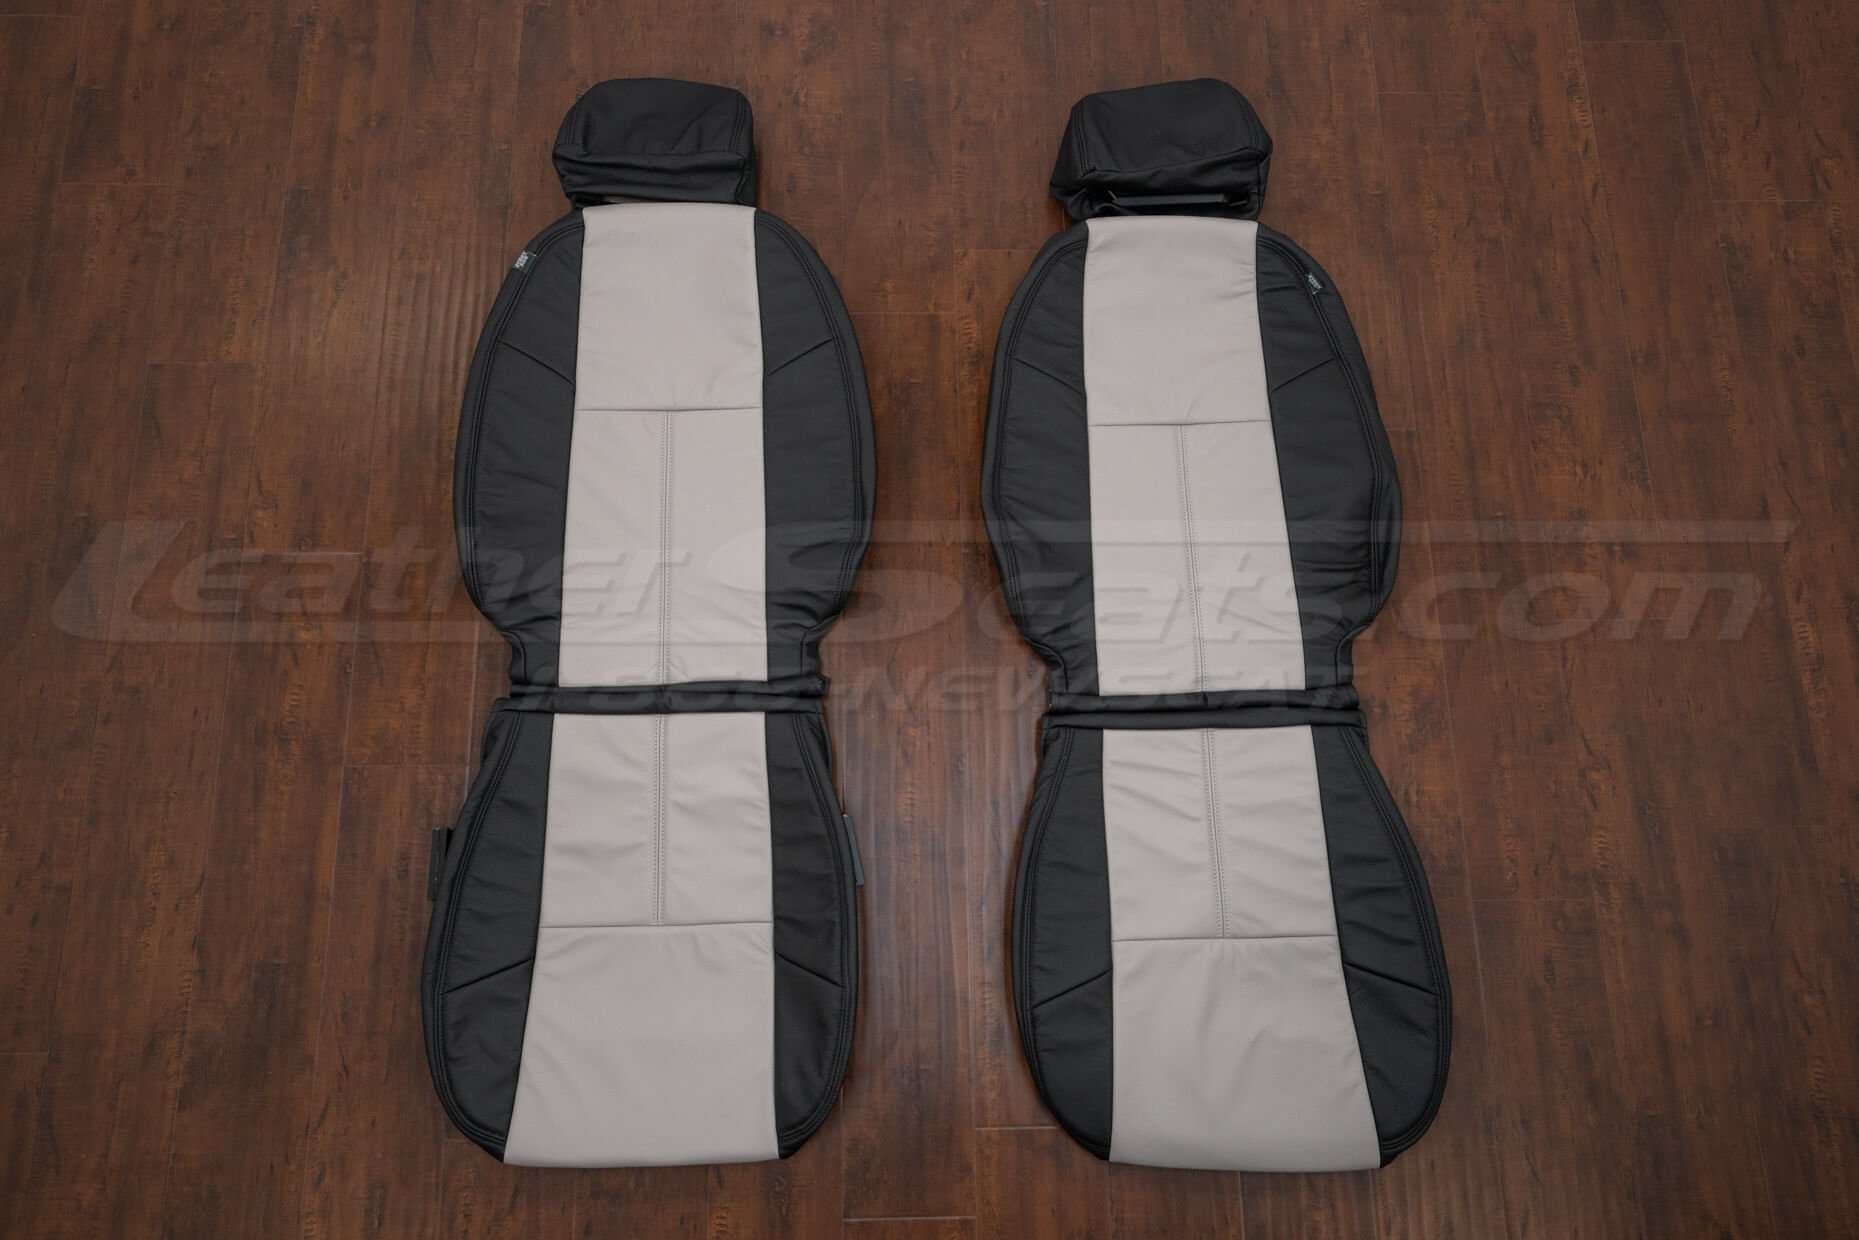 GMC Sierra Leather Seat Kit - Black & Dove Grey - Front seat upholstery